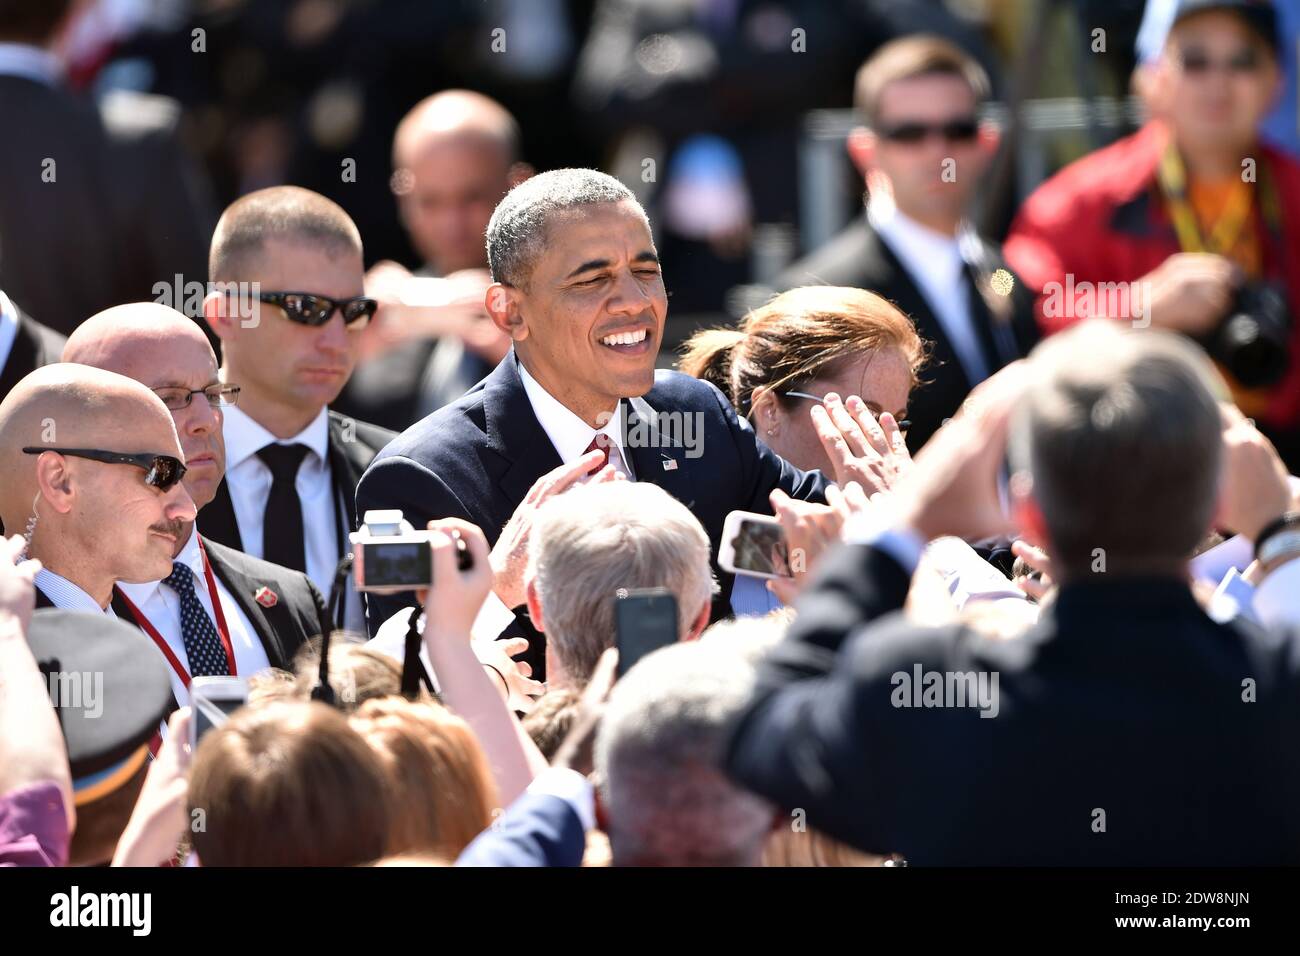 US President Barack Obama attends the bi-national France-USA ceremony at the American cemetery in Colleville, as part of the official ceremonies on the occasion of the D-Day 70th Anniversary, on June 6, 2014 in Normandy, France. Photo by Abd Rabbo-Bernard-Gouhier-Mousse/ABACAPRESS.COM Stock Photo